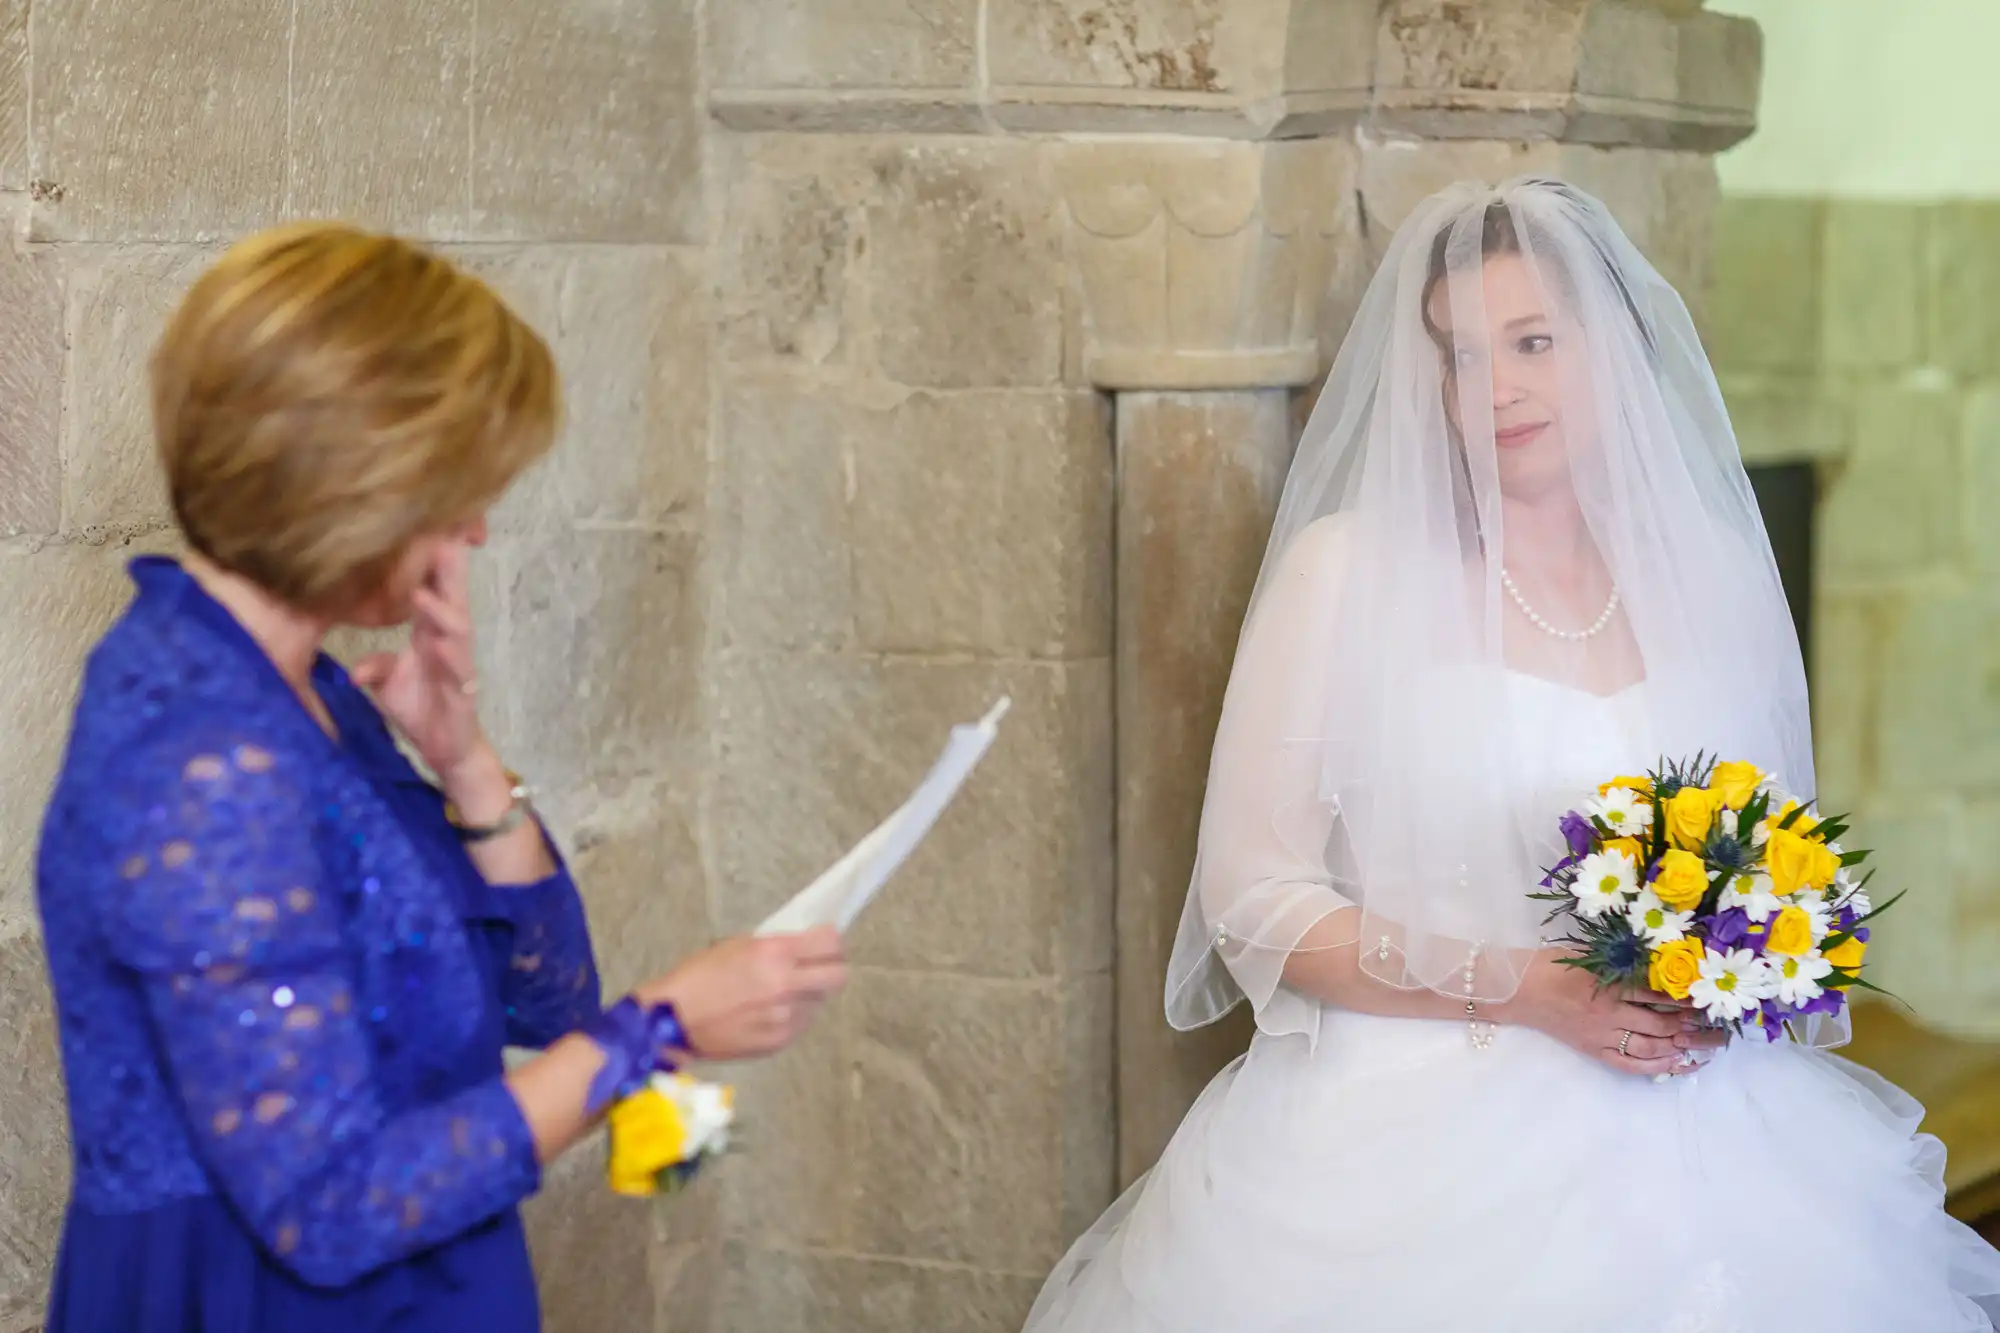 A bride in a white dress holds a bouquet while listening to an emotional woman in a blue dress reading from a paper in a stone church.